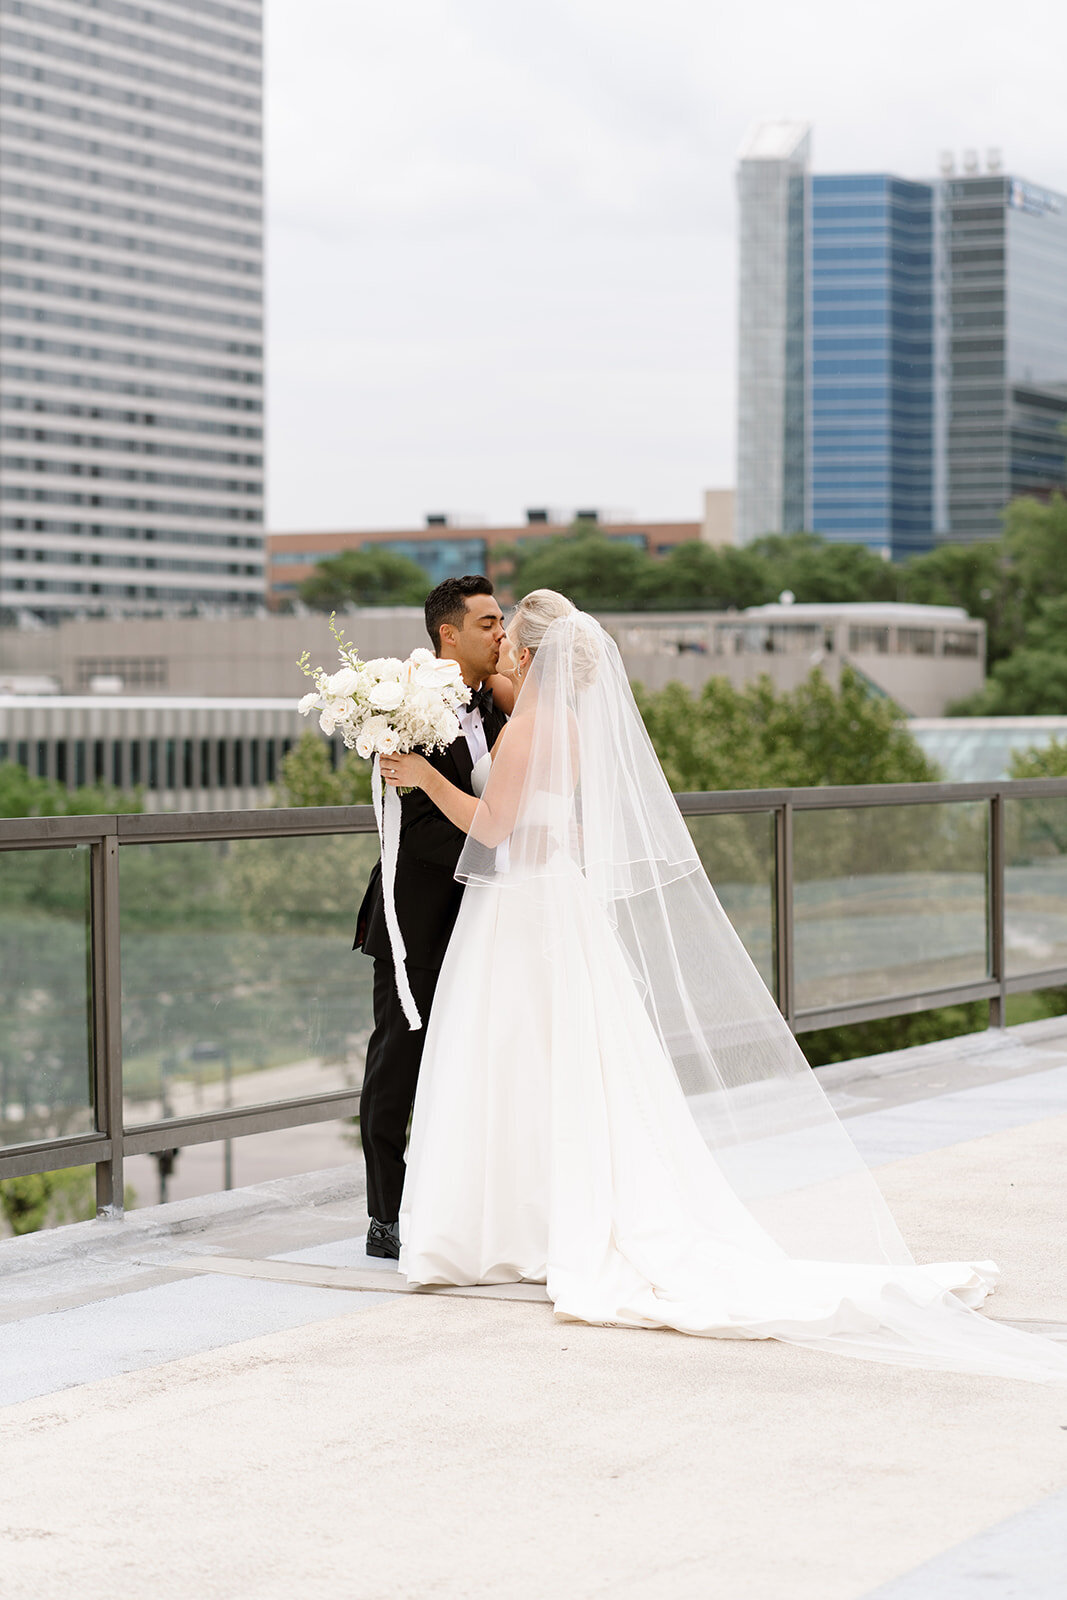 The Parks - The Gallery Event Space - Kansas City Wedding - Kansas City Wedding Photography - Nick and Lexie Photo Film-435